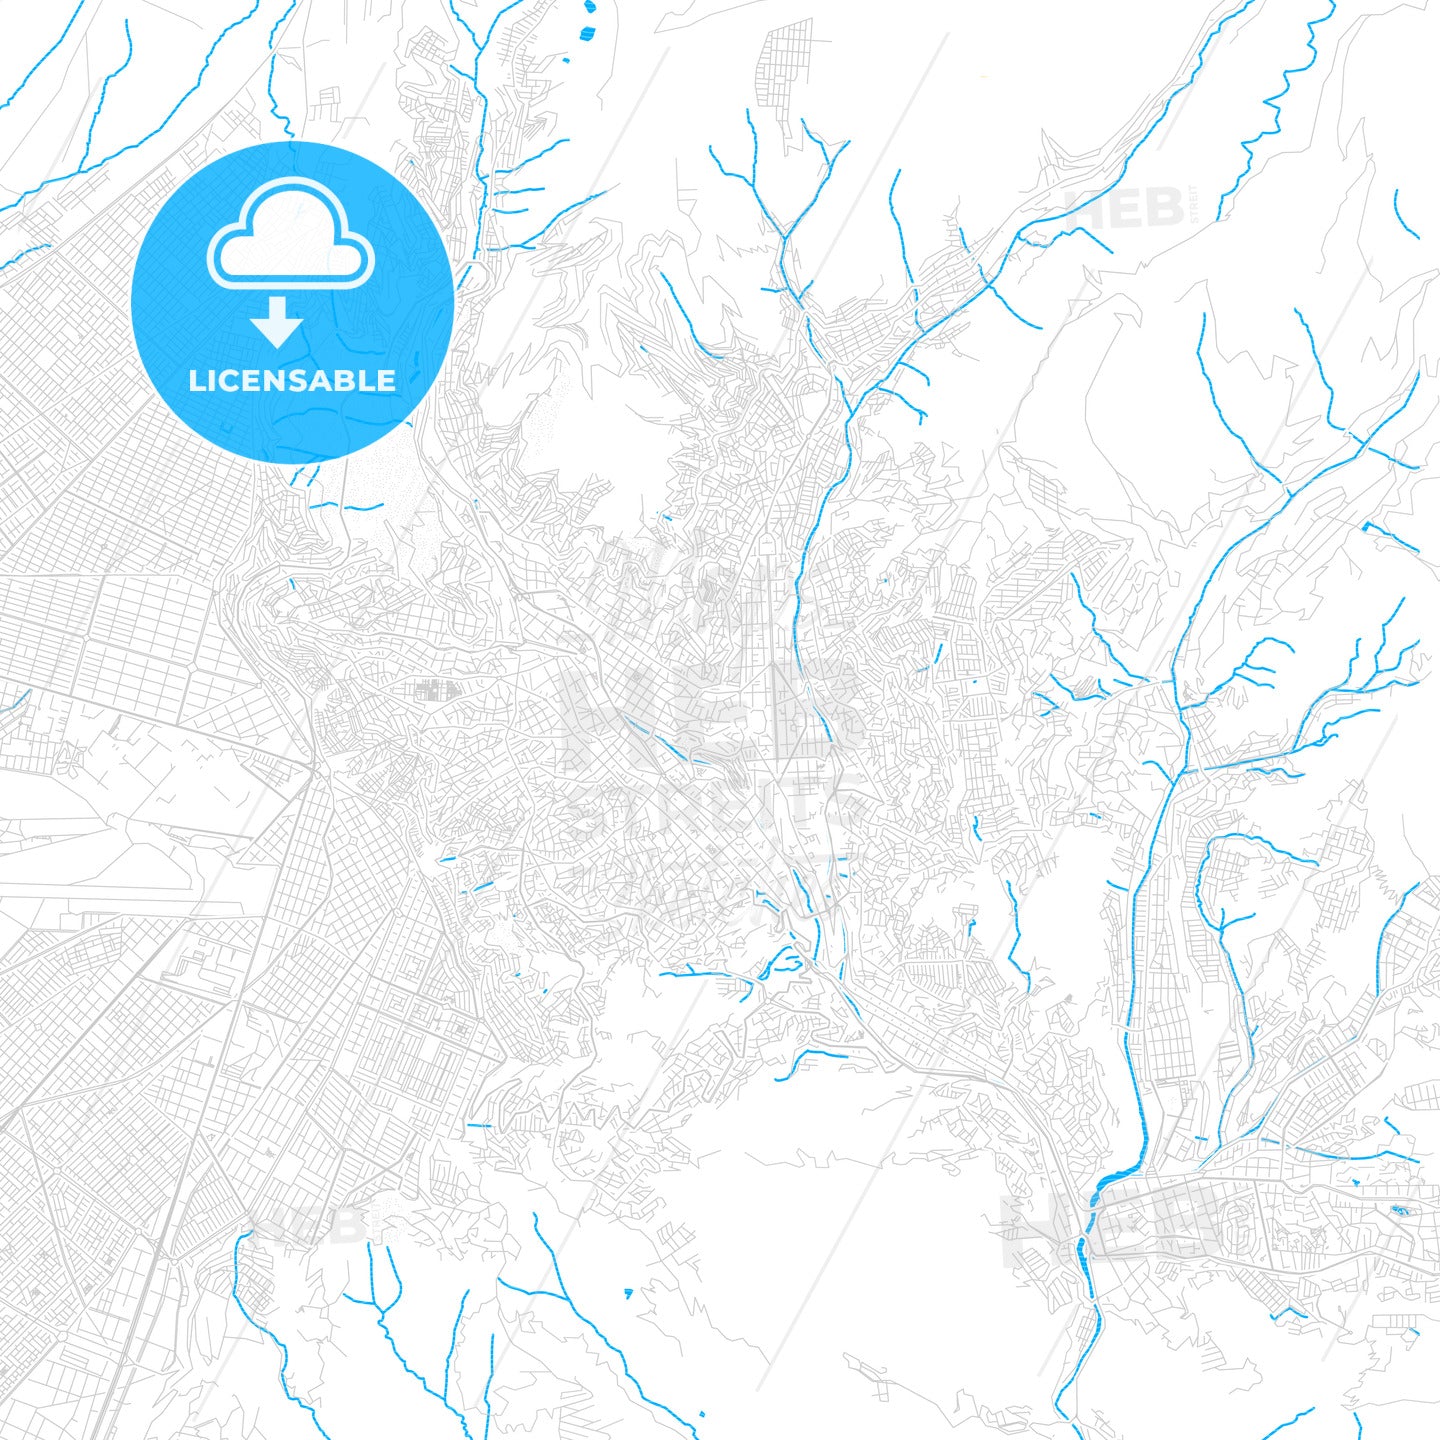 La Paz, Bolivia PDF vector map with water in focus